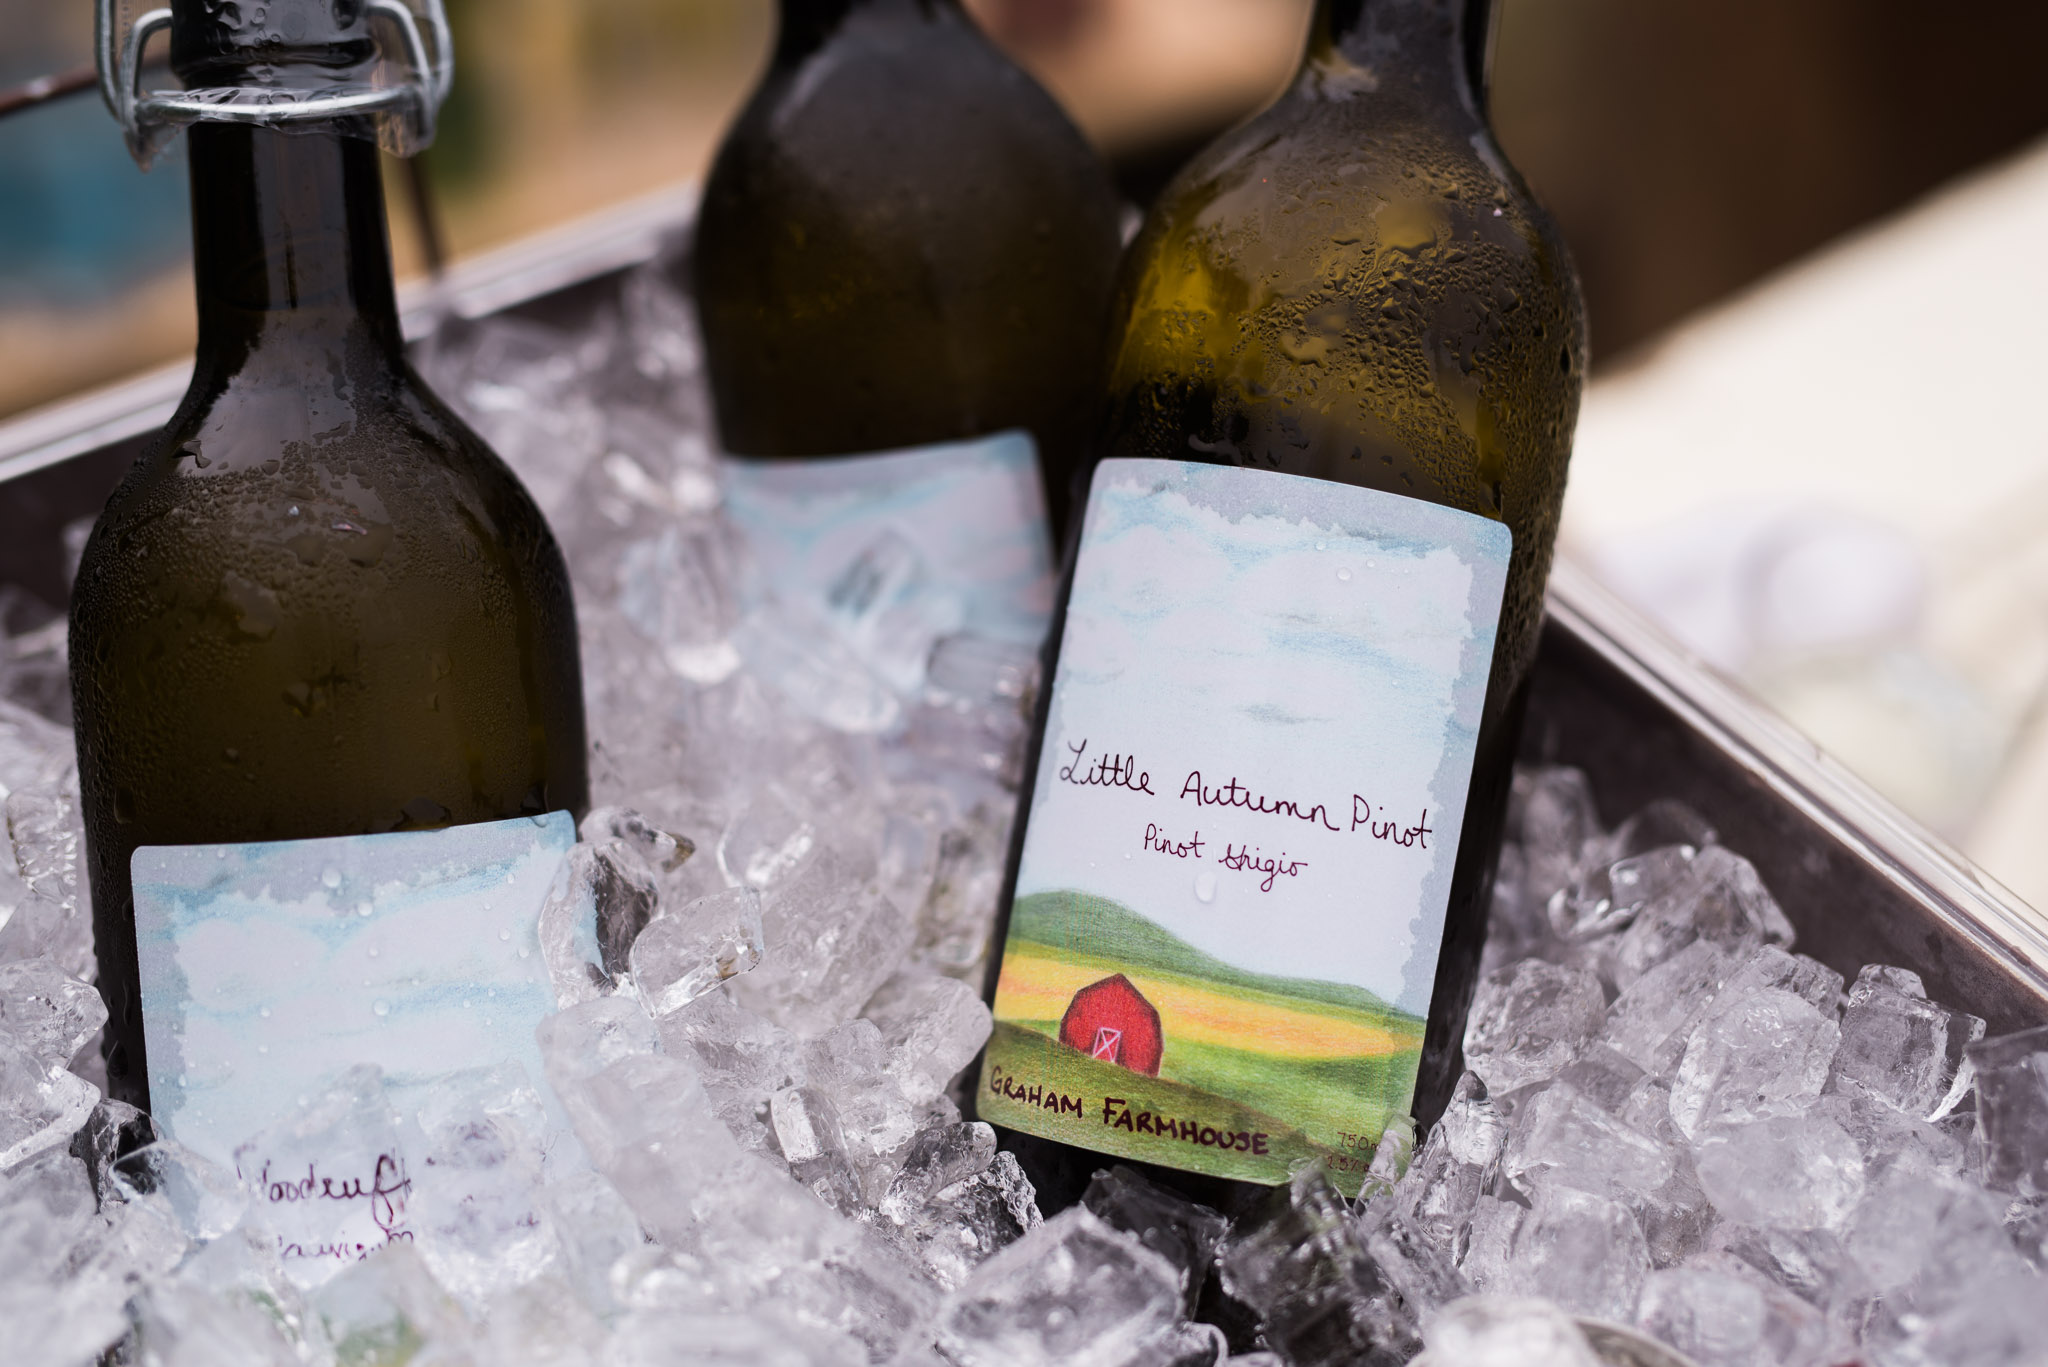 Magdalena vents chose local wine for the Berkshire event #magdalenaevents magdalenaevents.com